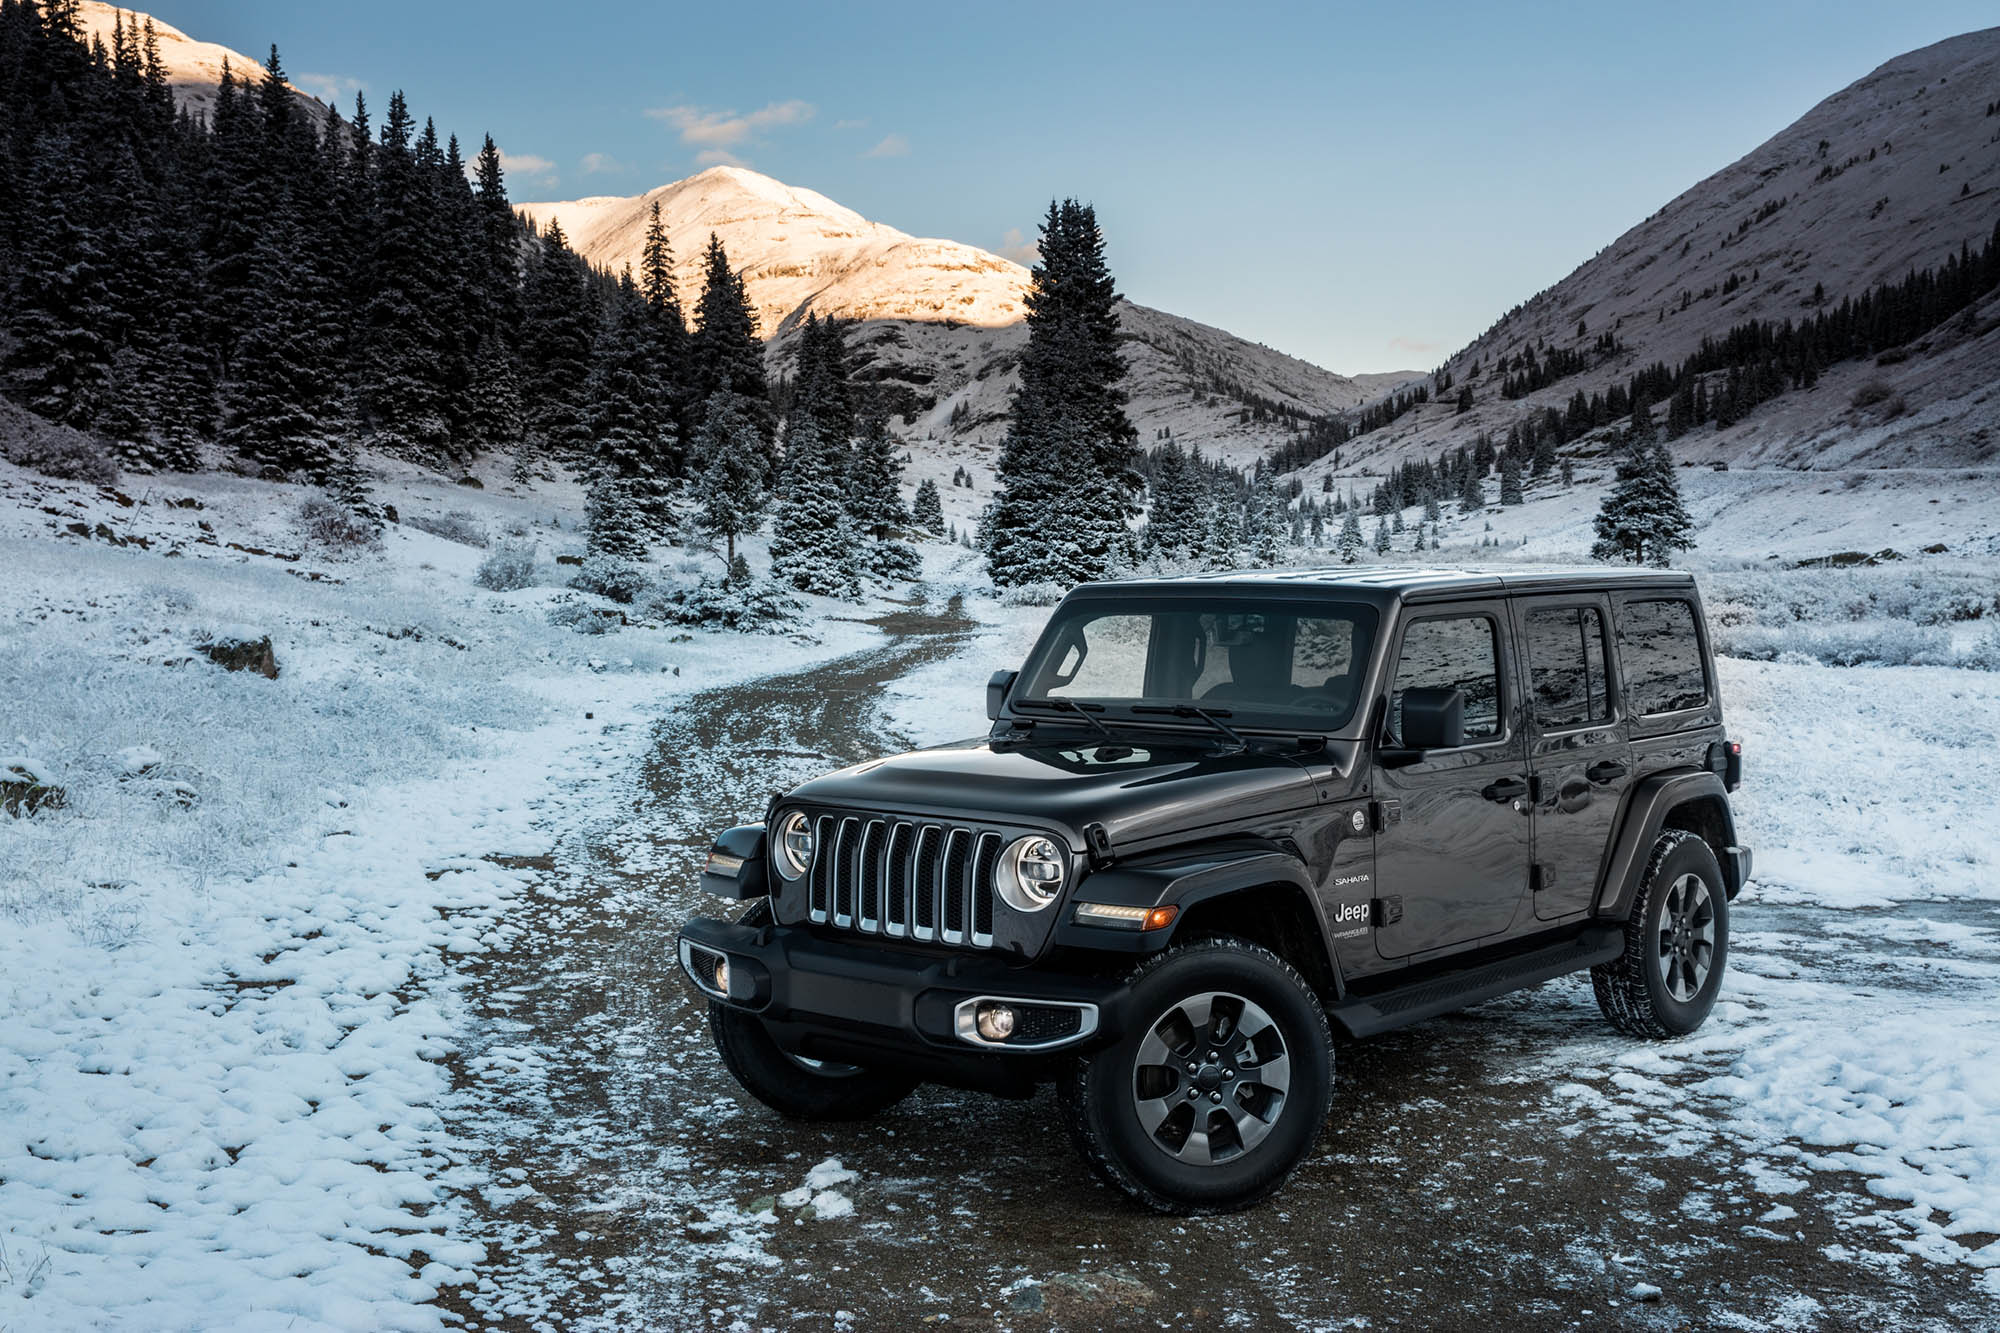 Jeep Wrangler parked on snowy dirt road with mountains in the background.